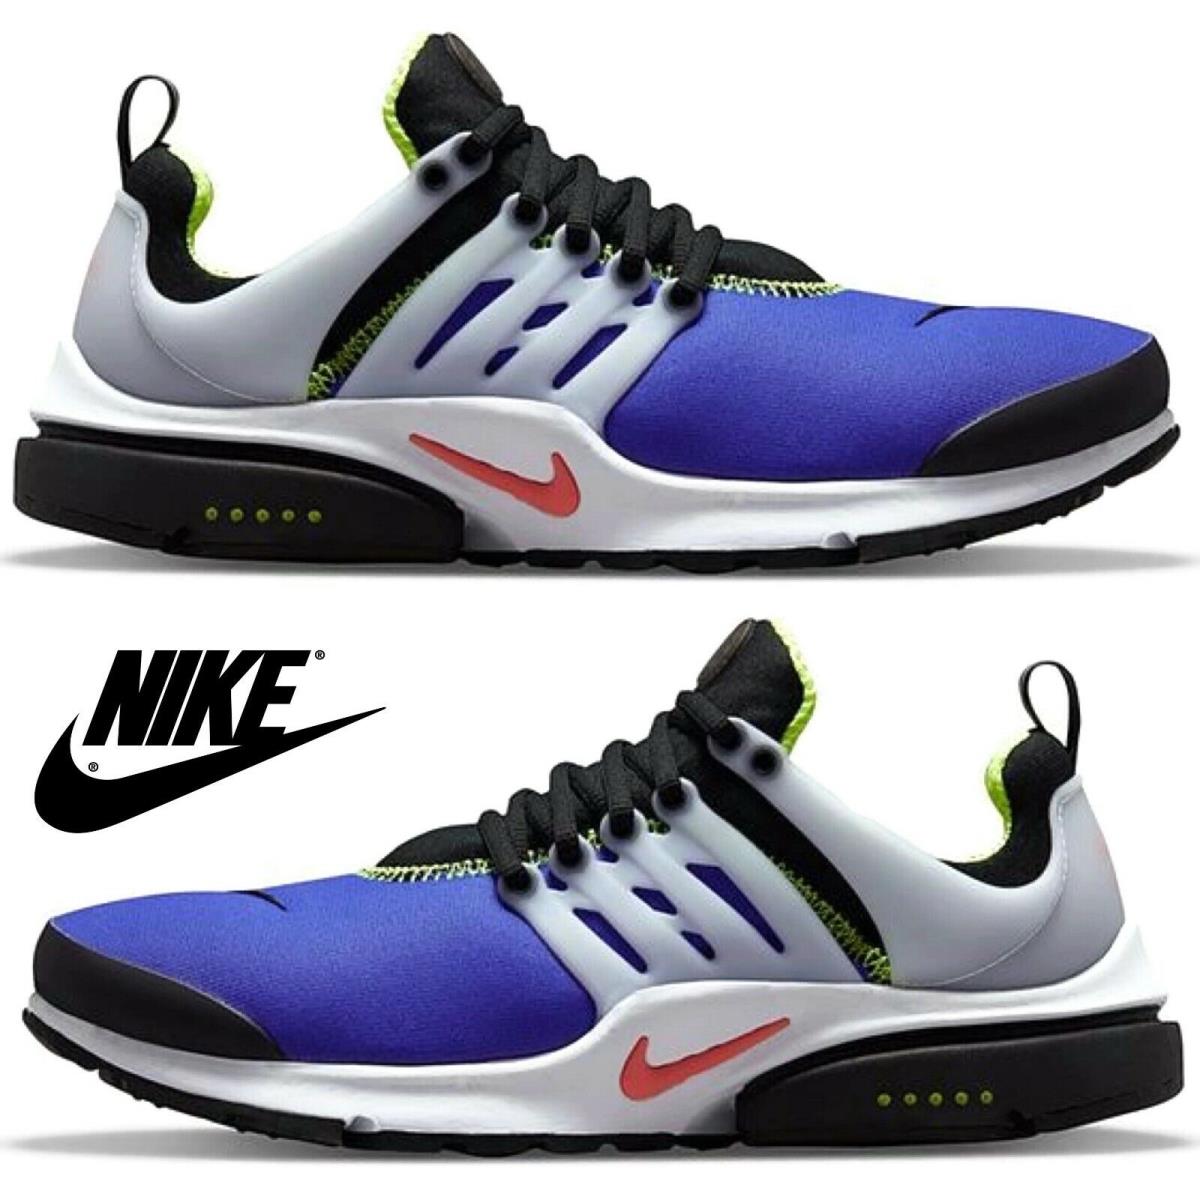 Nike Air Presto Running Sneakers Men`s Athletic Comfort Casual Shoes Blue Gray